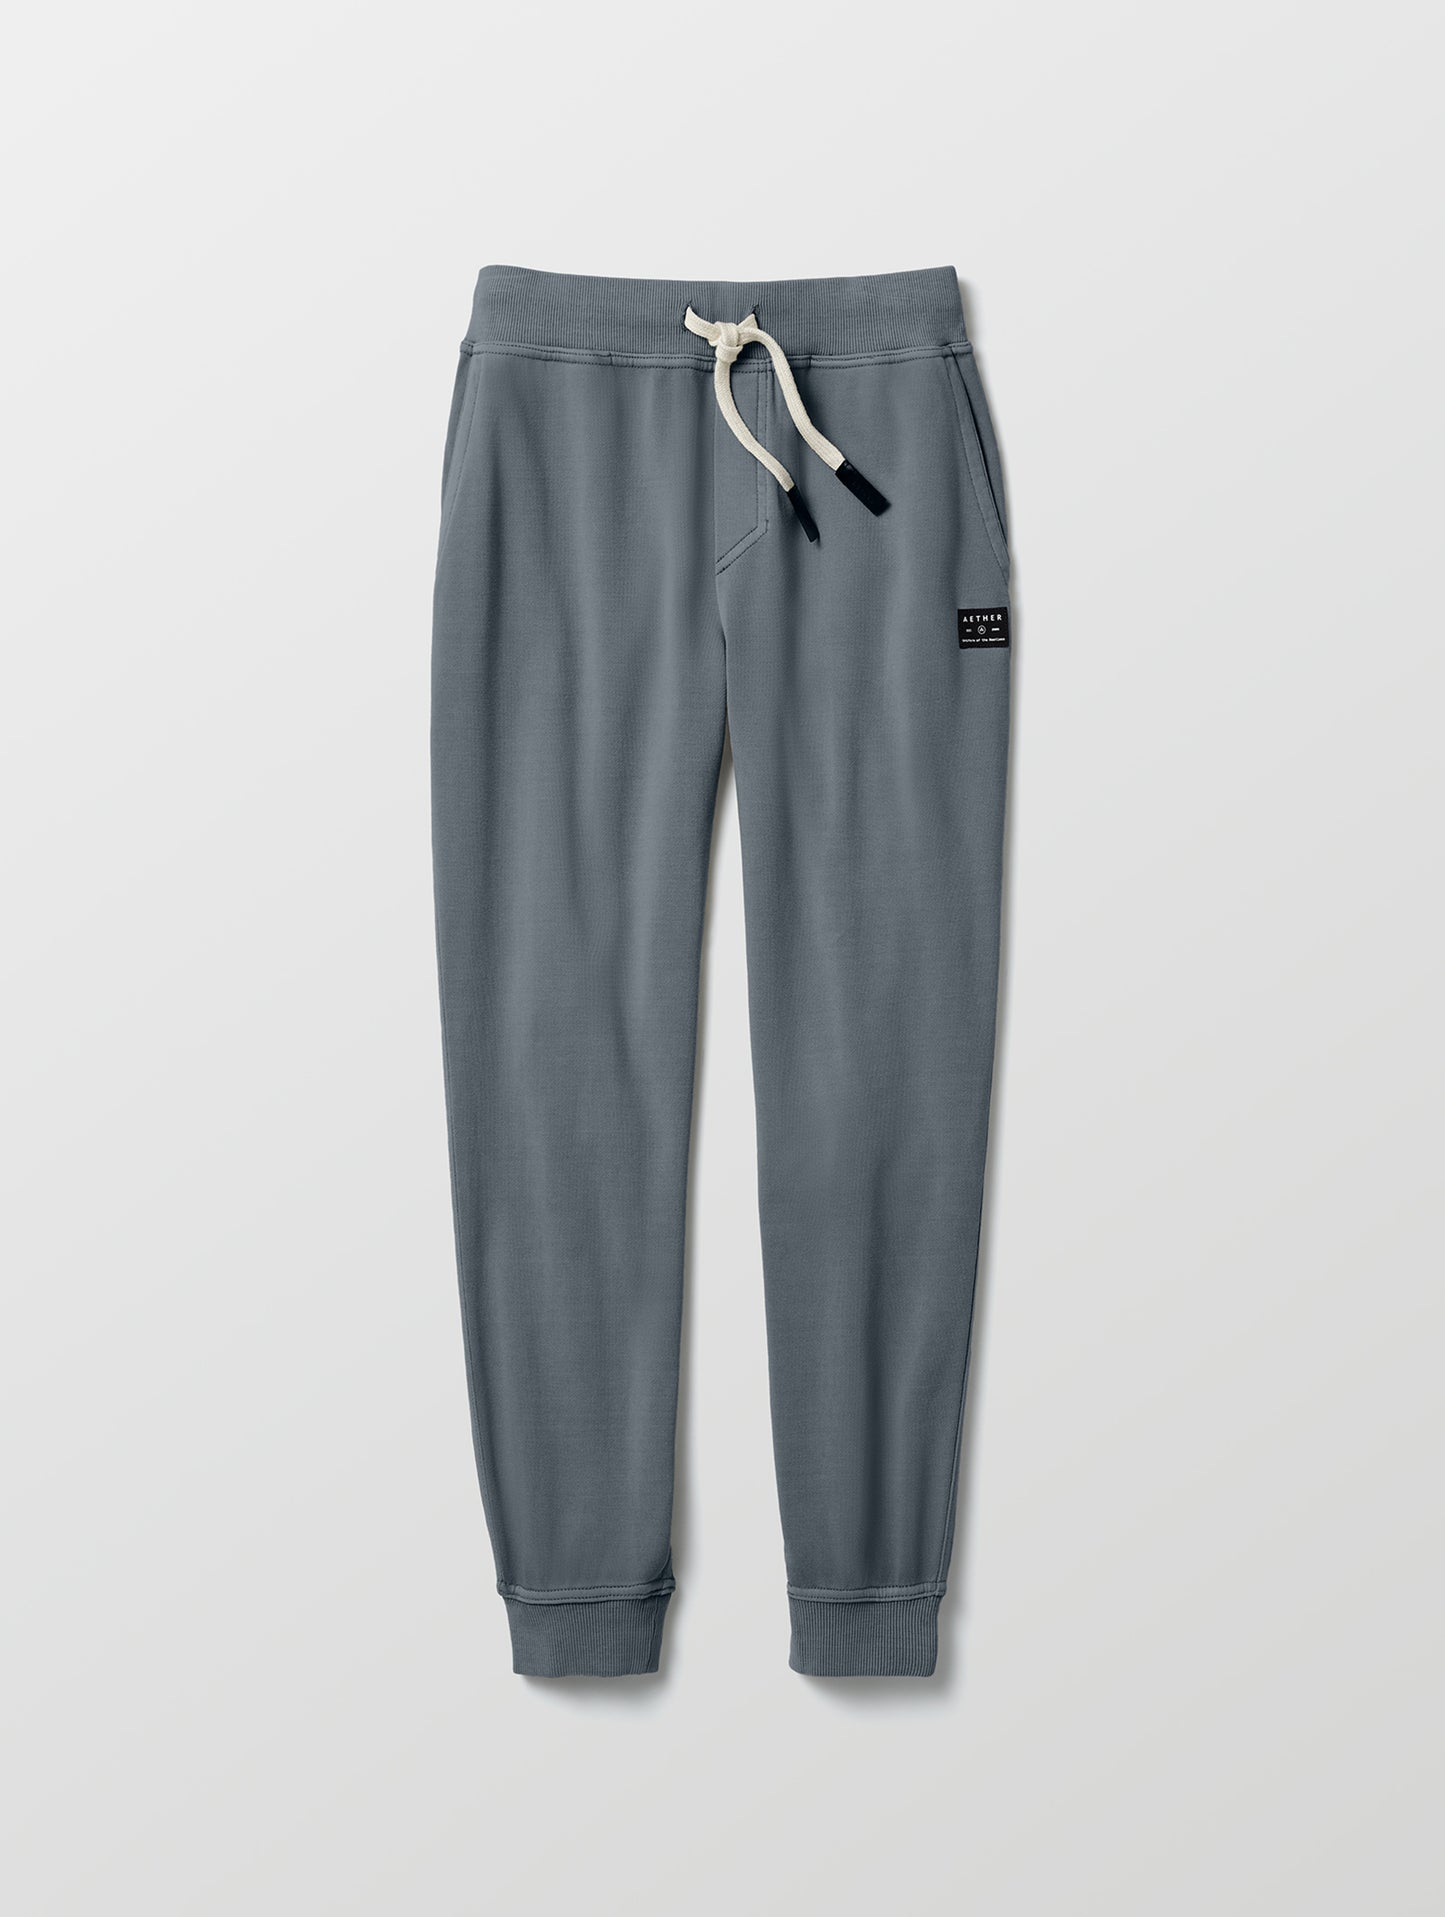 grey jogger for women from AETHER Apparel